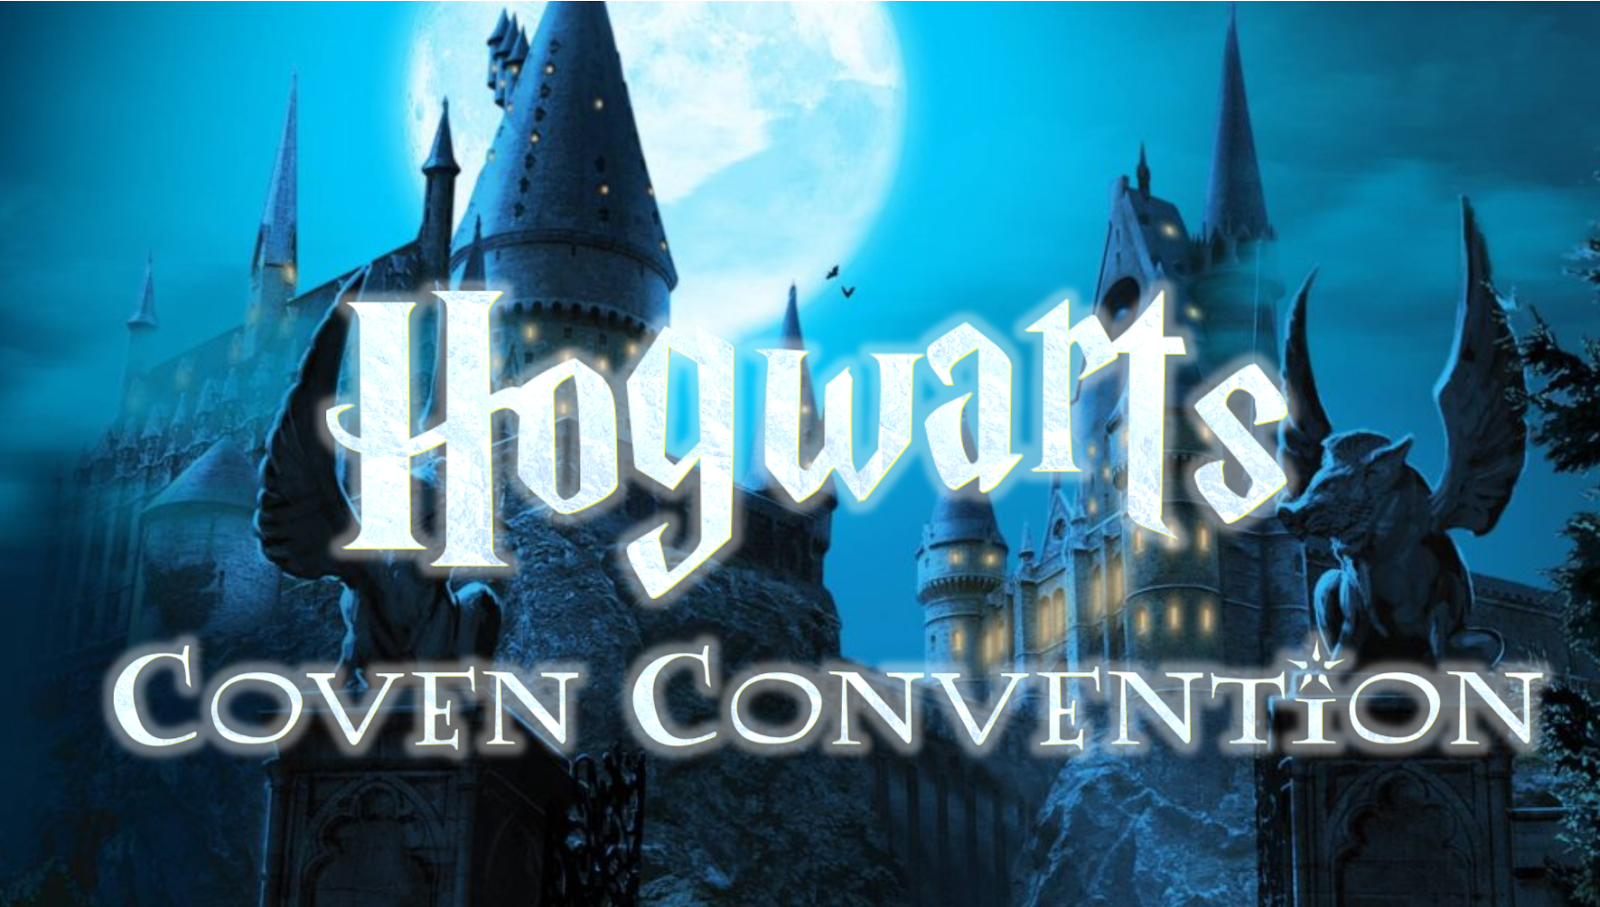 Hogwarts Coven Convention